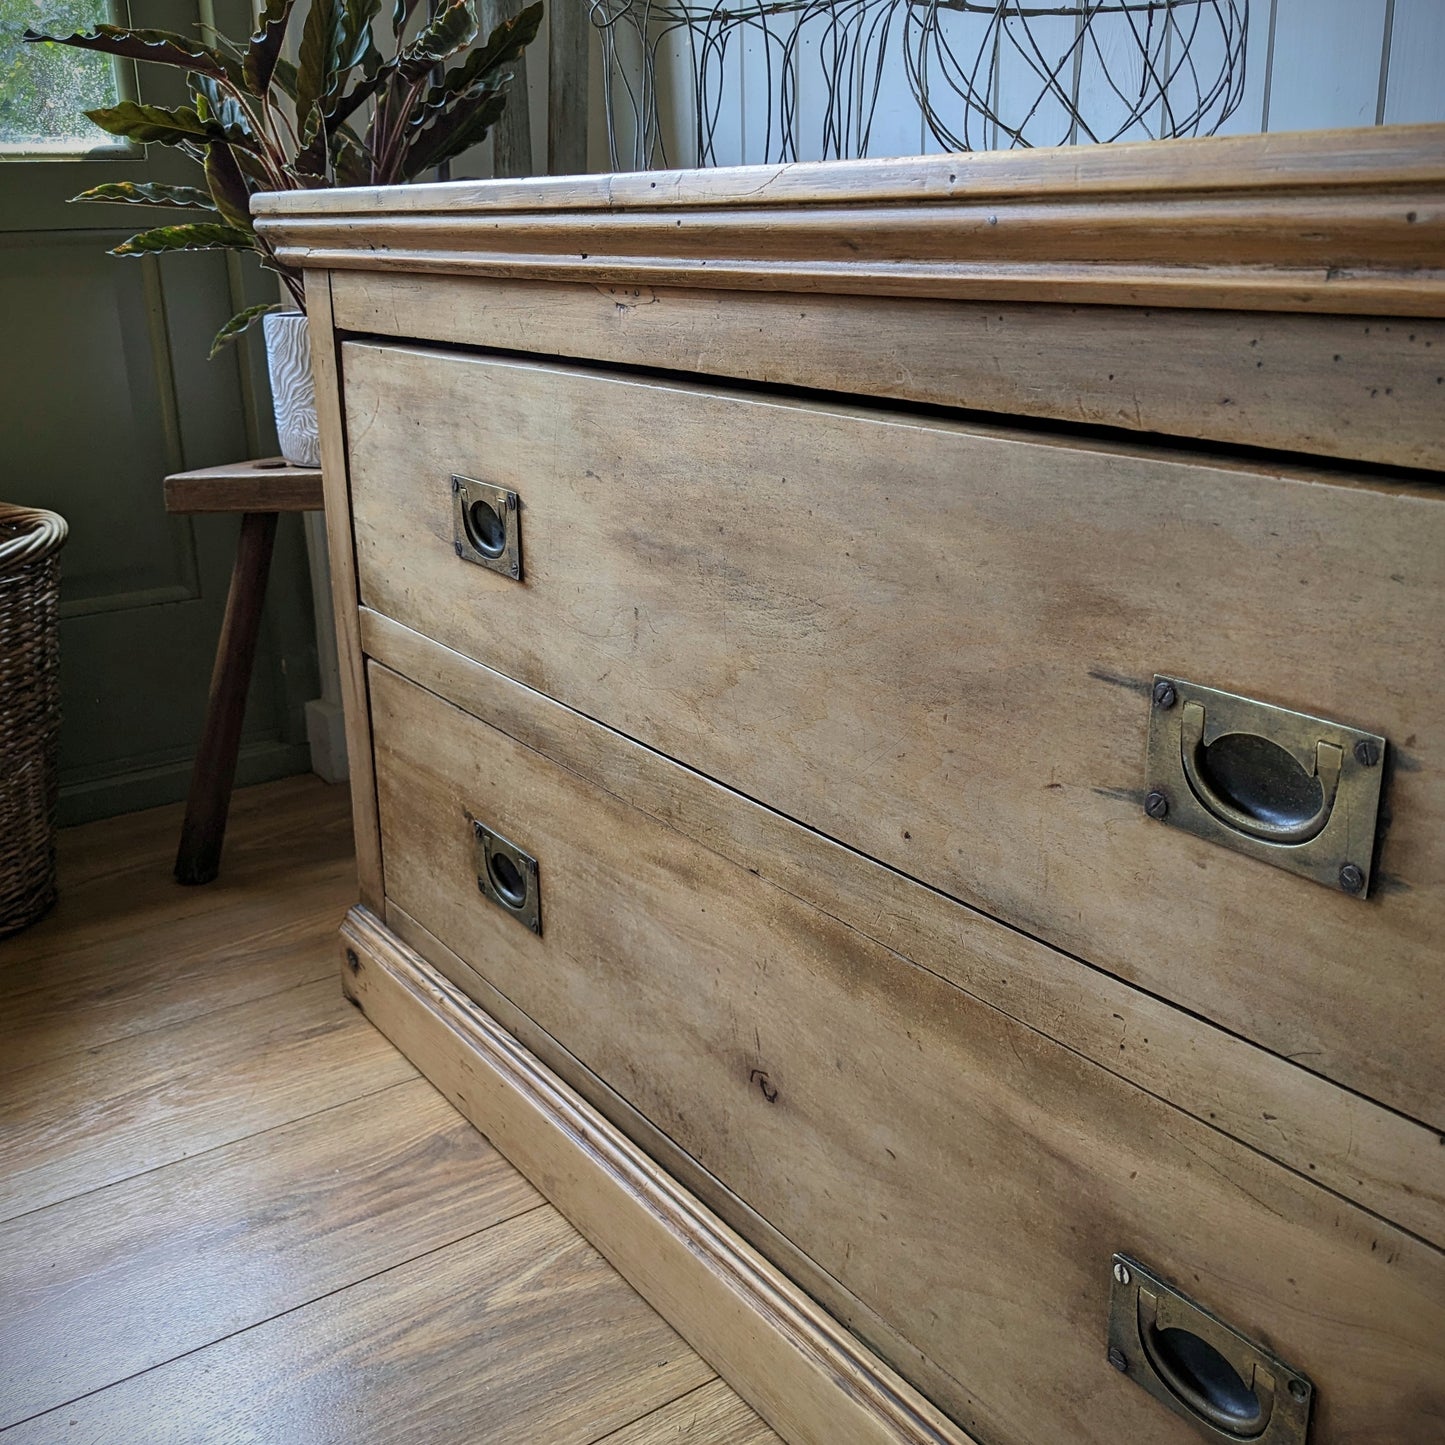 Low Antique Chest of Drawers